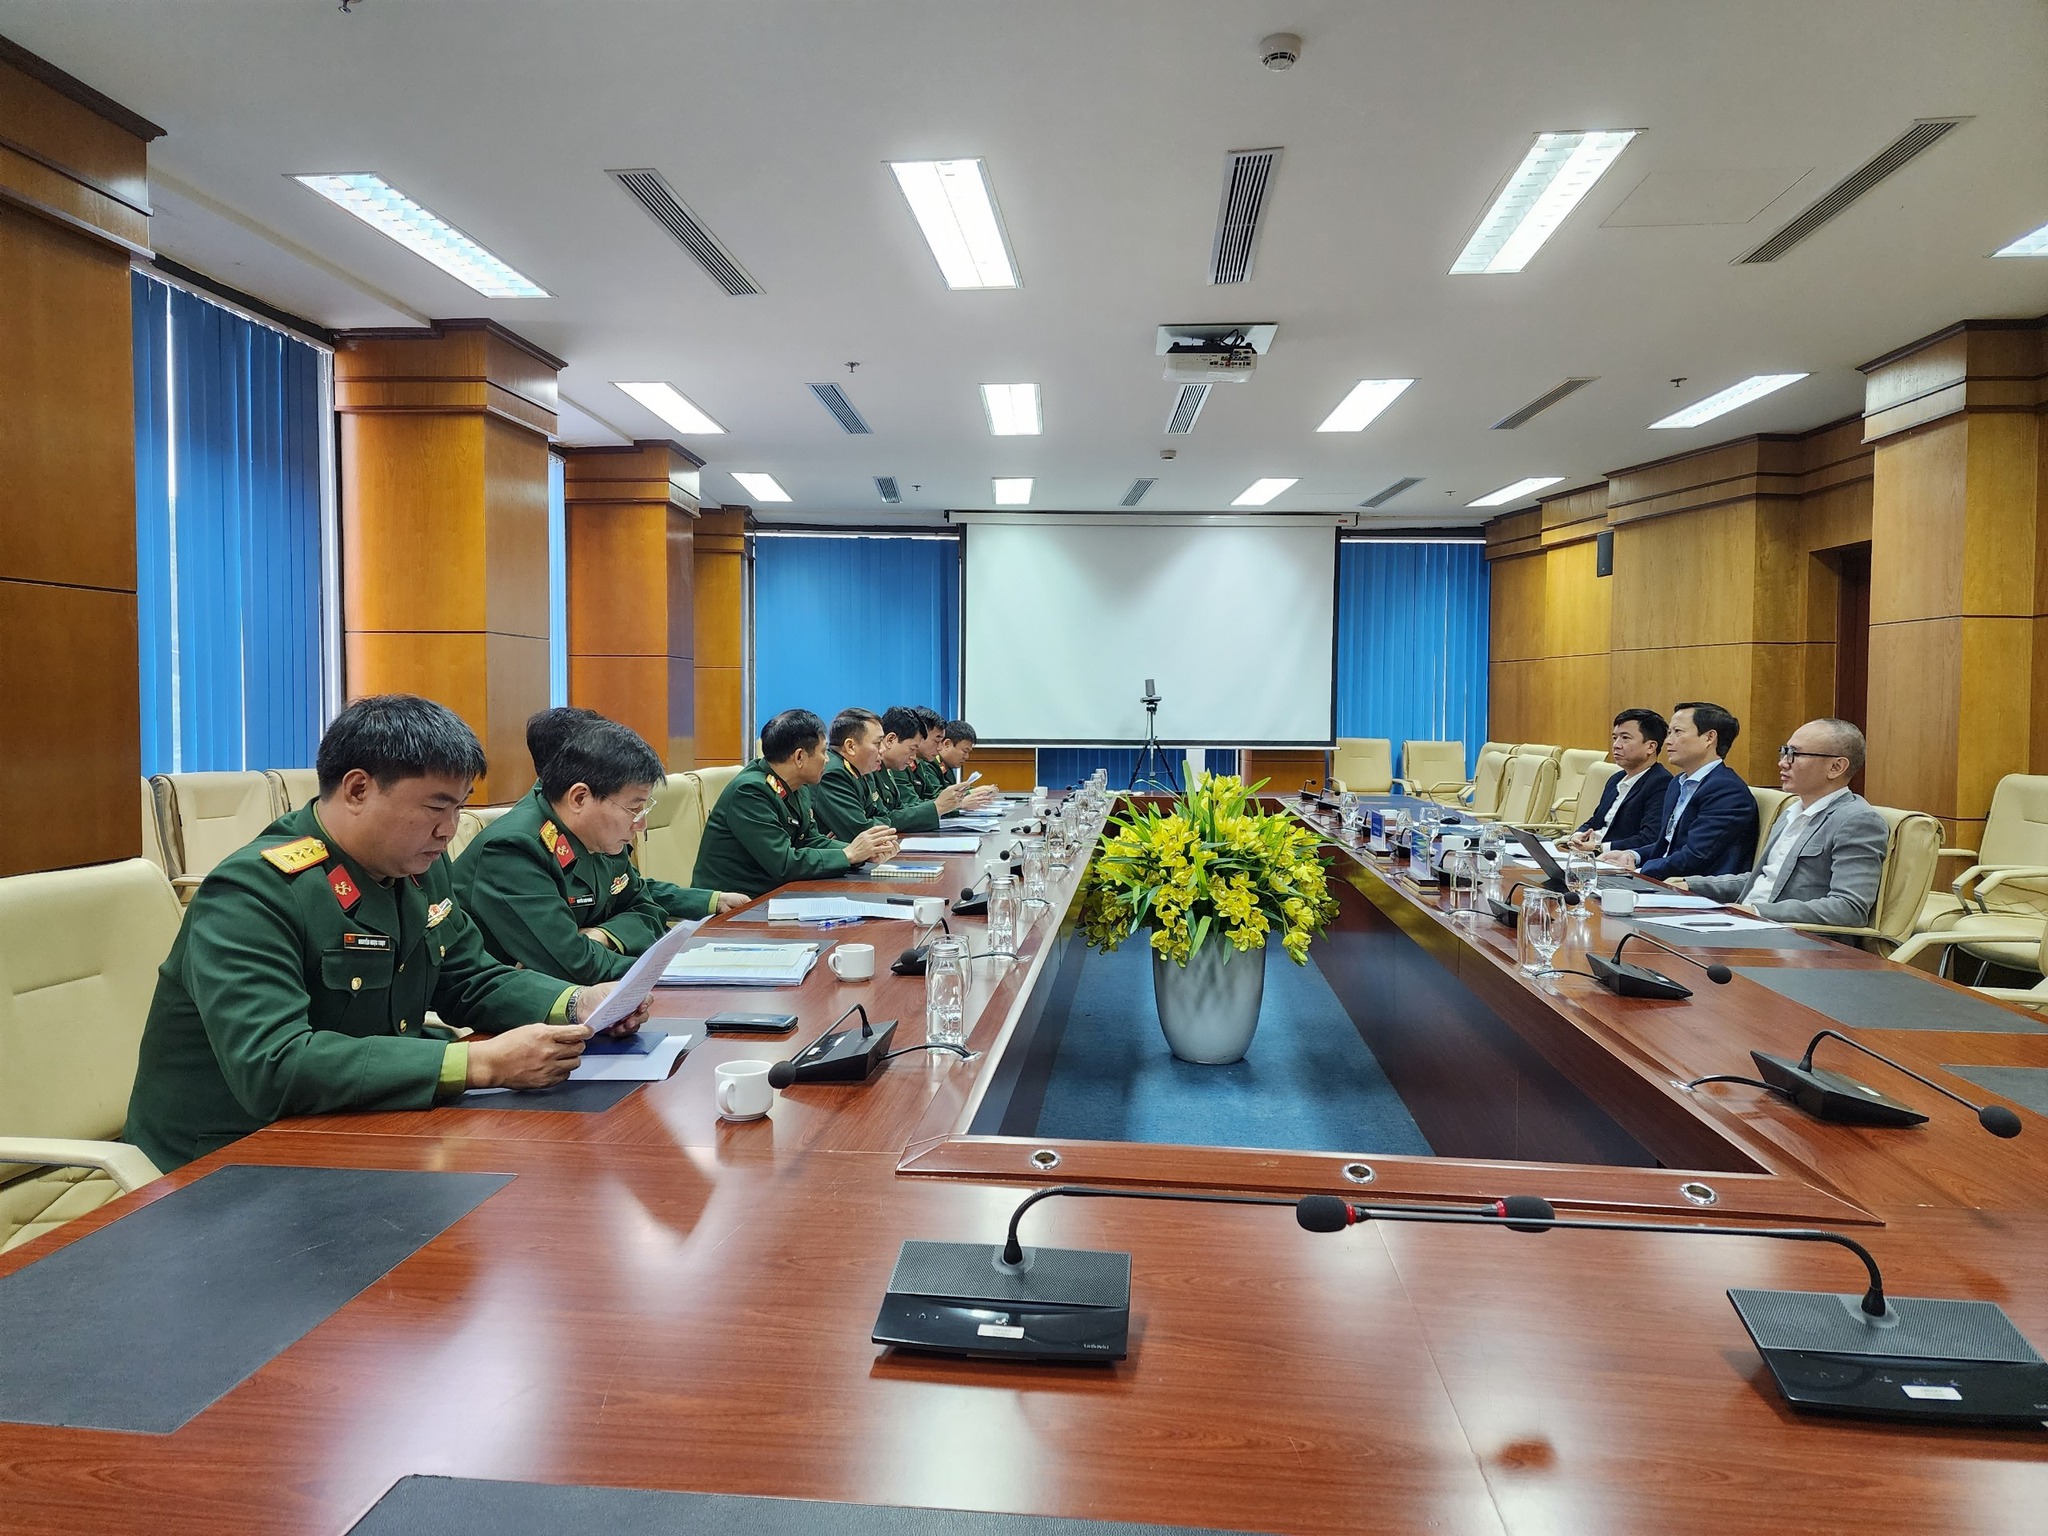 QTMAC had a visit and worked with the Vietnam National Mine Action Center (VNMAC)